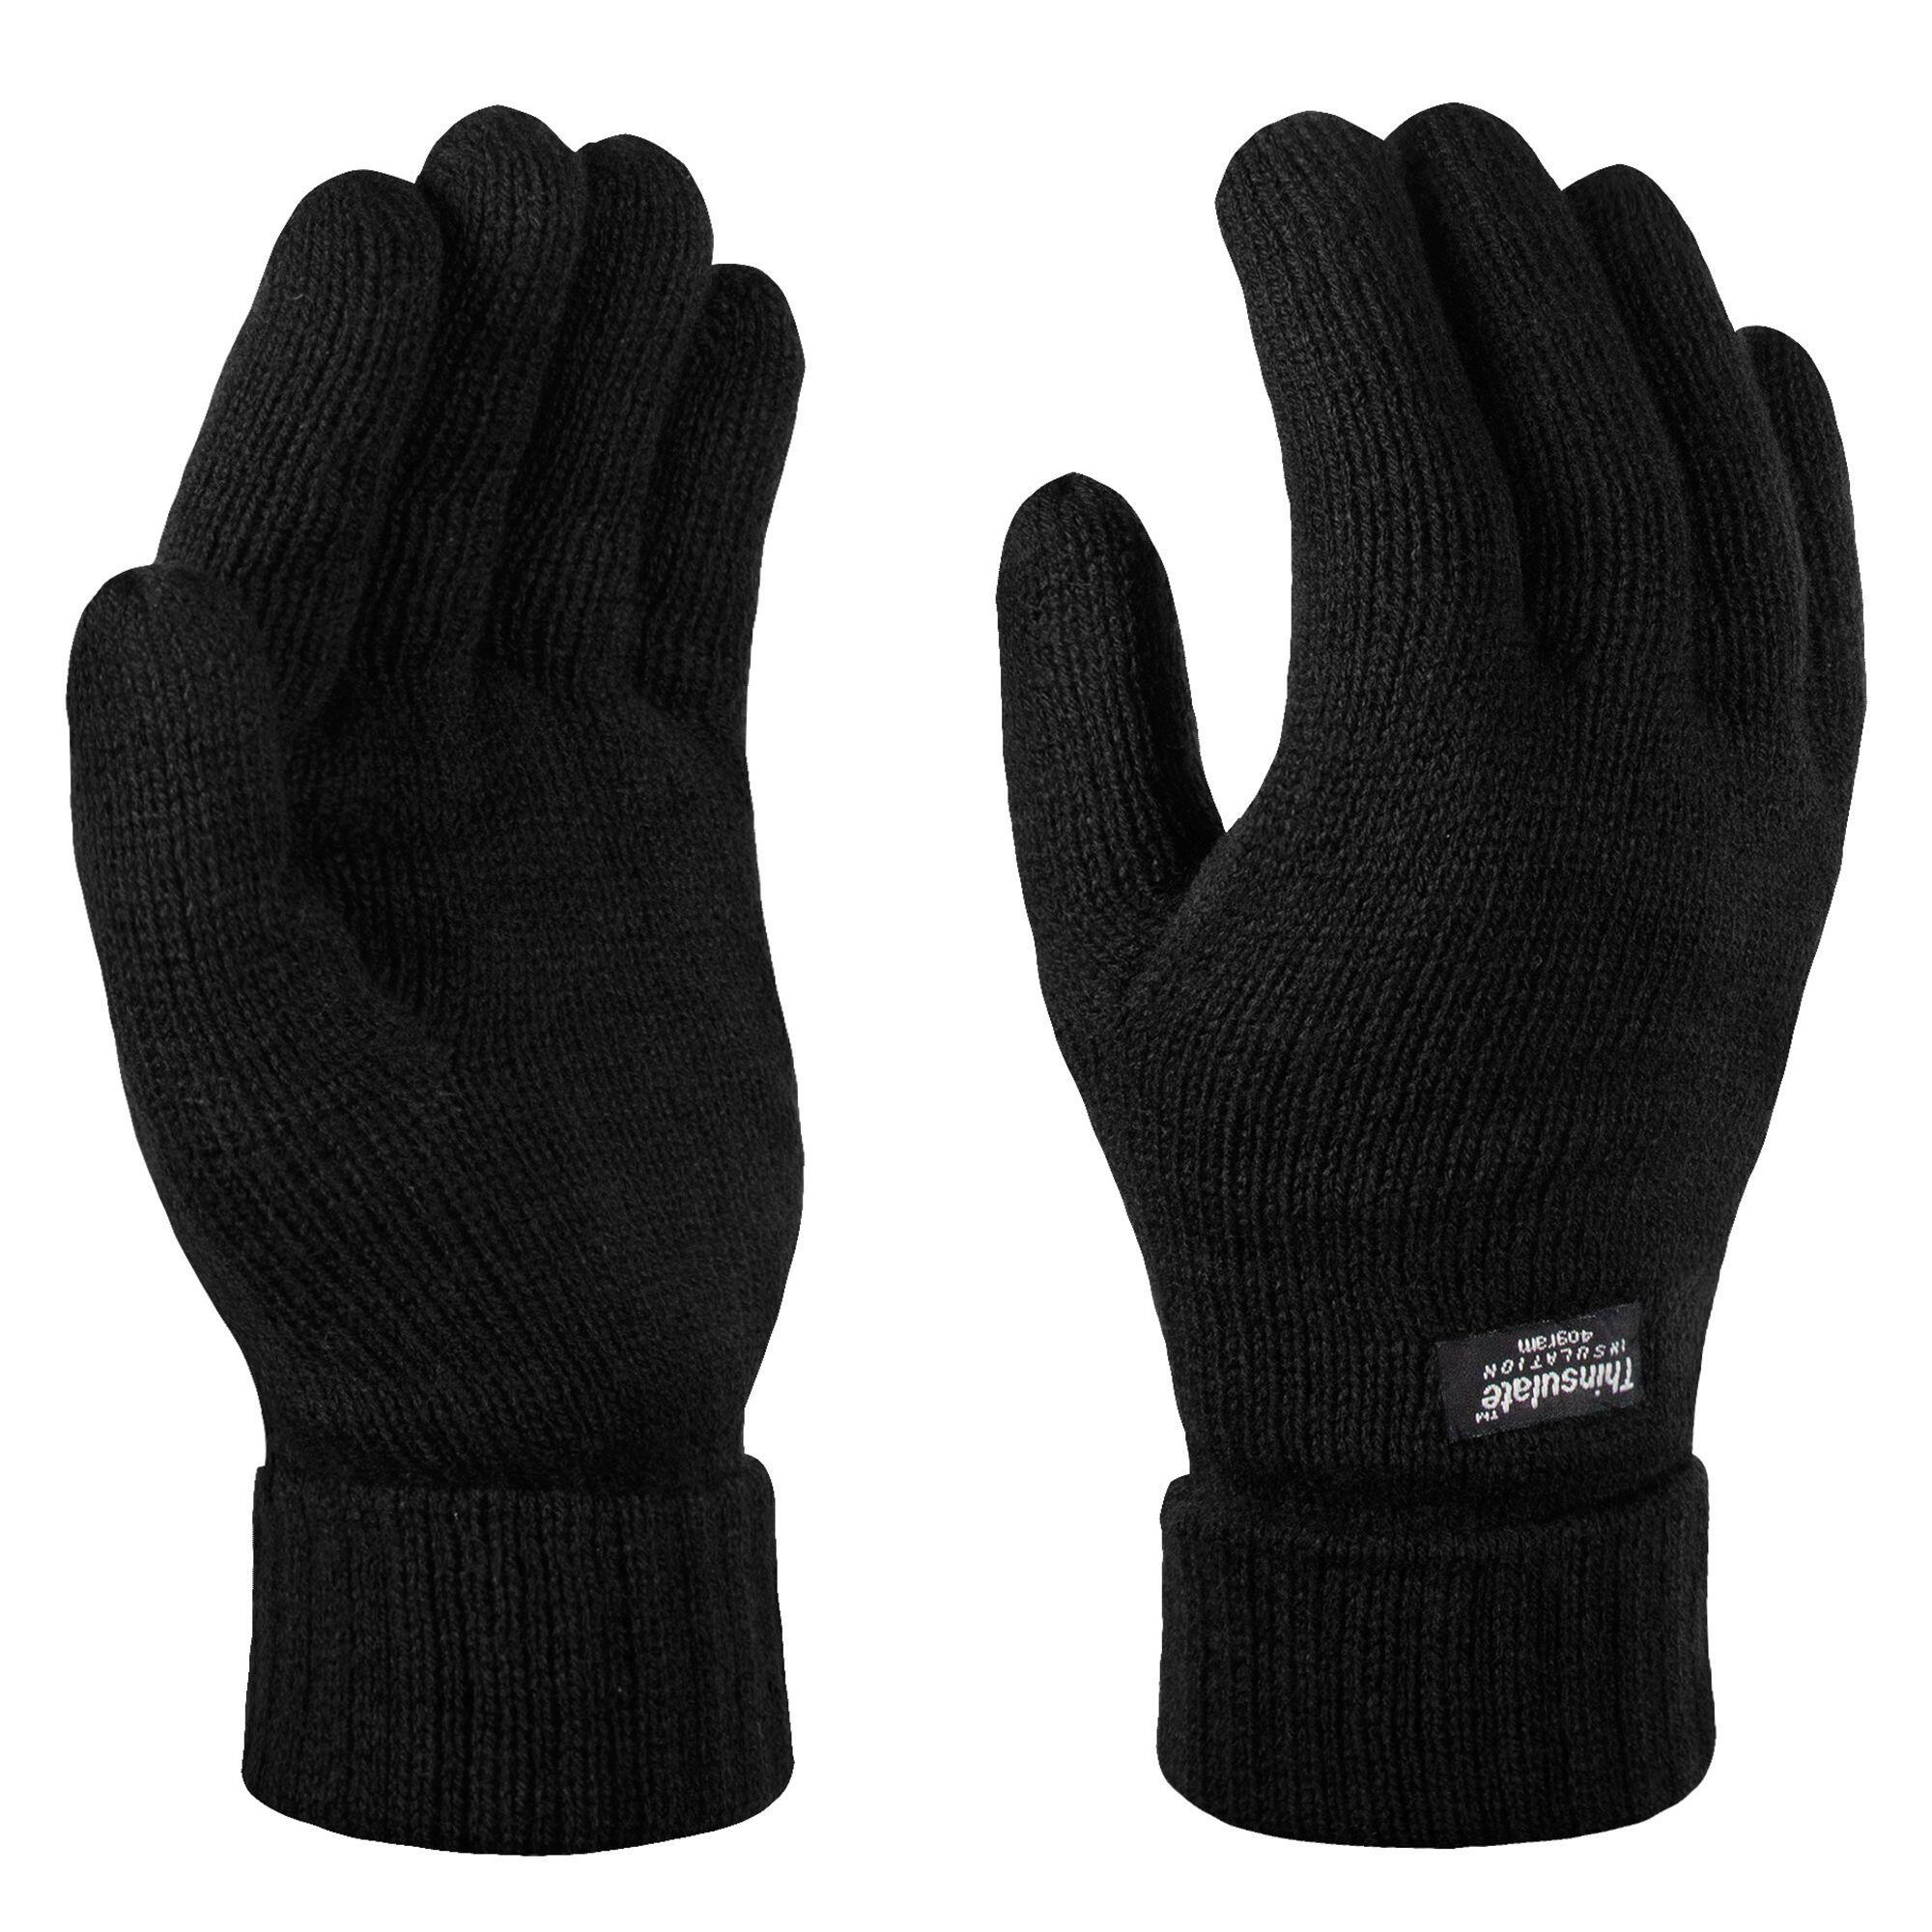 Unisex Thinsulate Thermal Winter Gloves (Black) 1/4